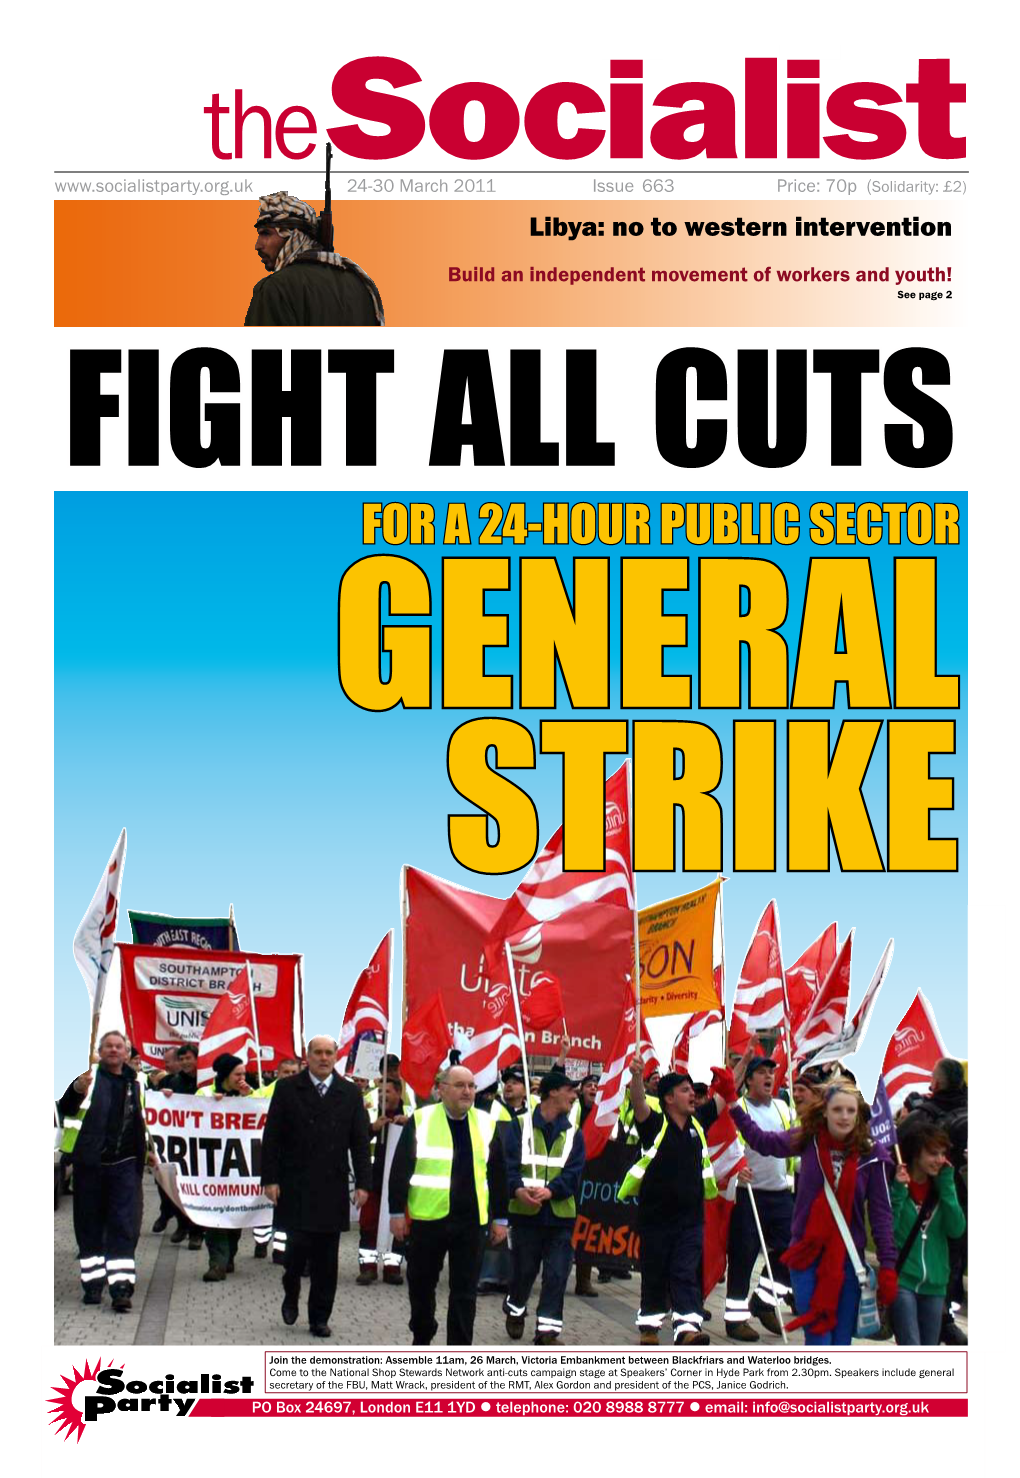 For a 24-Hour Public Sector General Strike